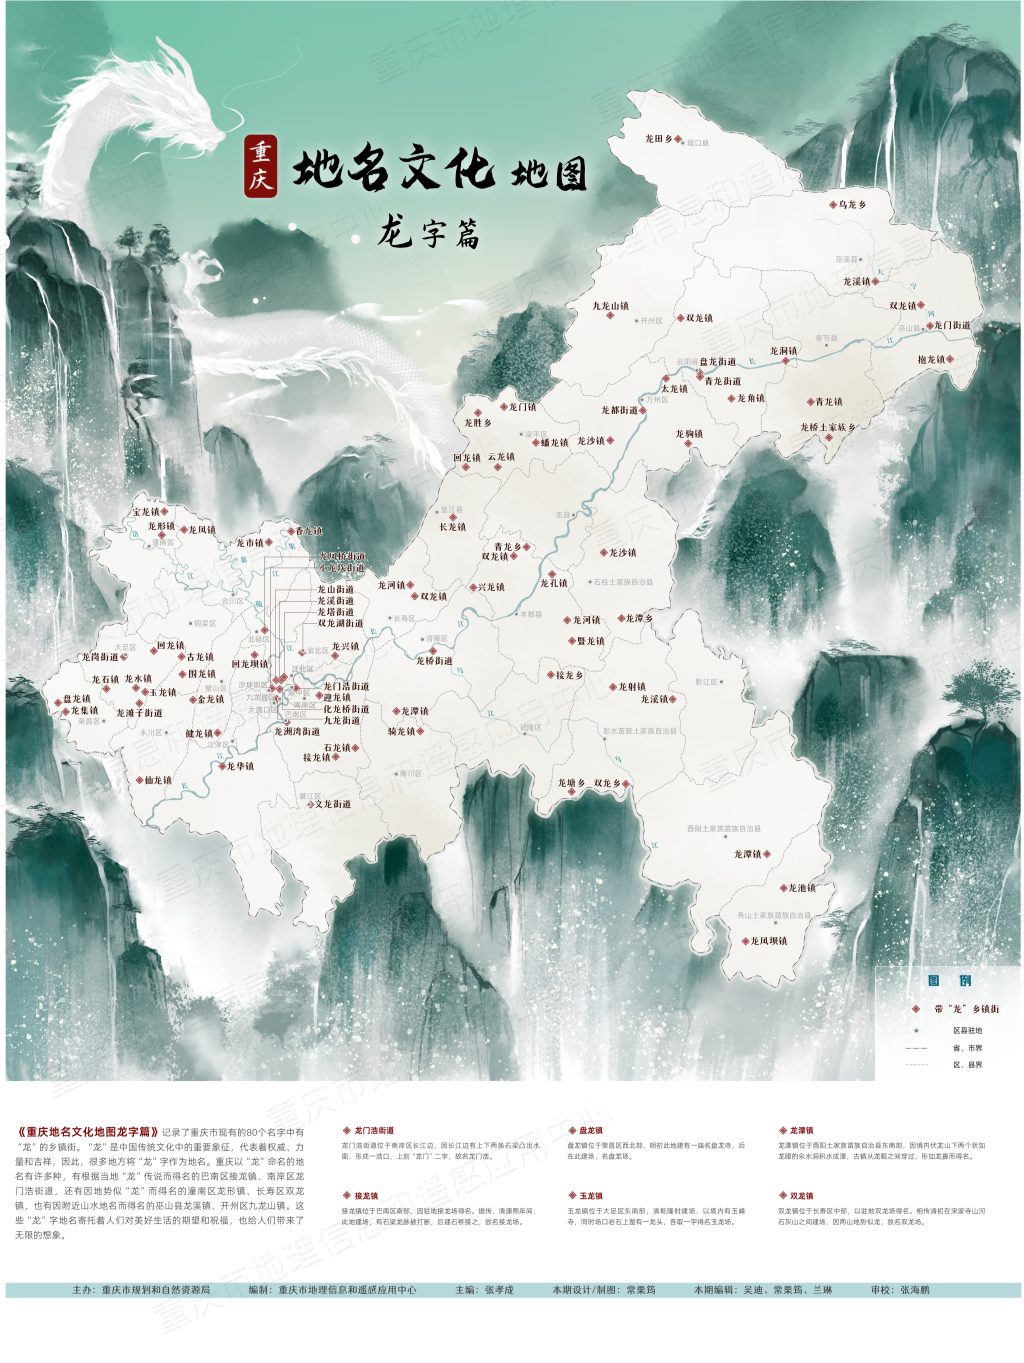 Map of Chongqing Place Name Culture: Places with “Dragon” in Their Names